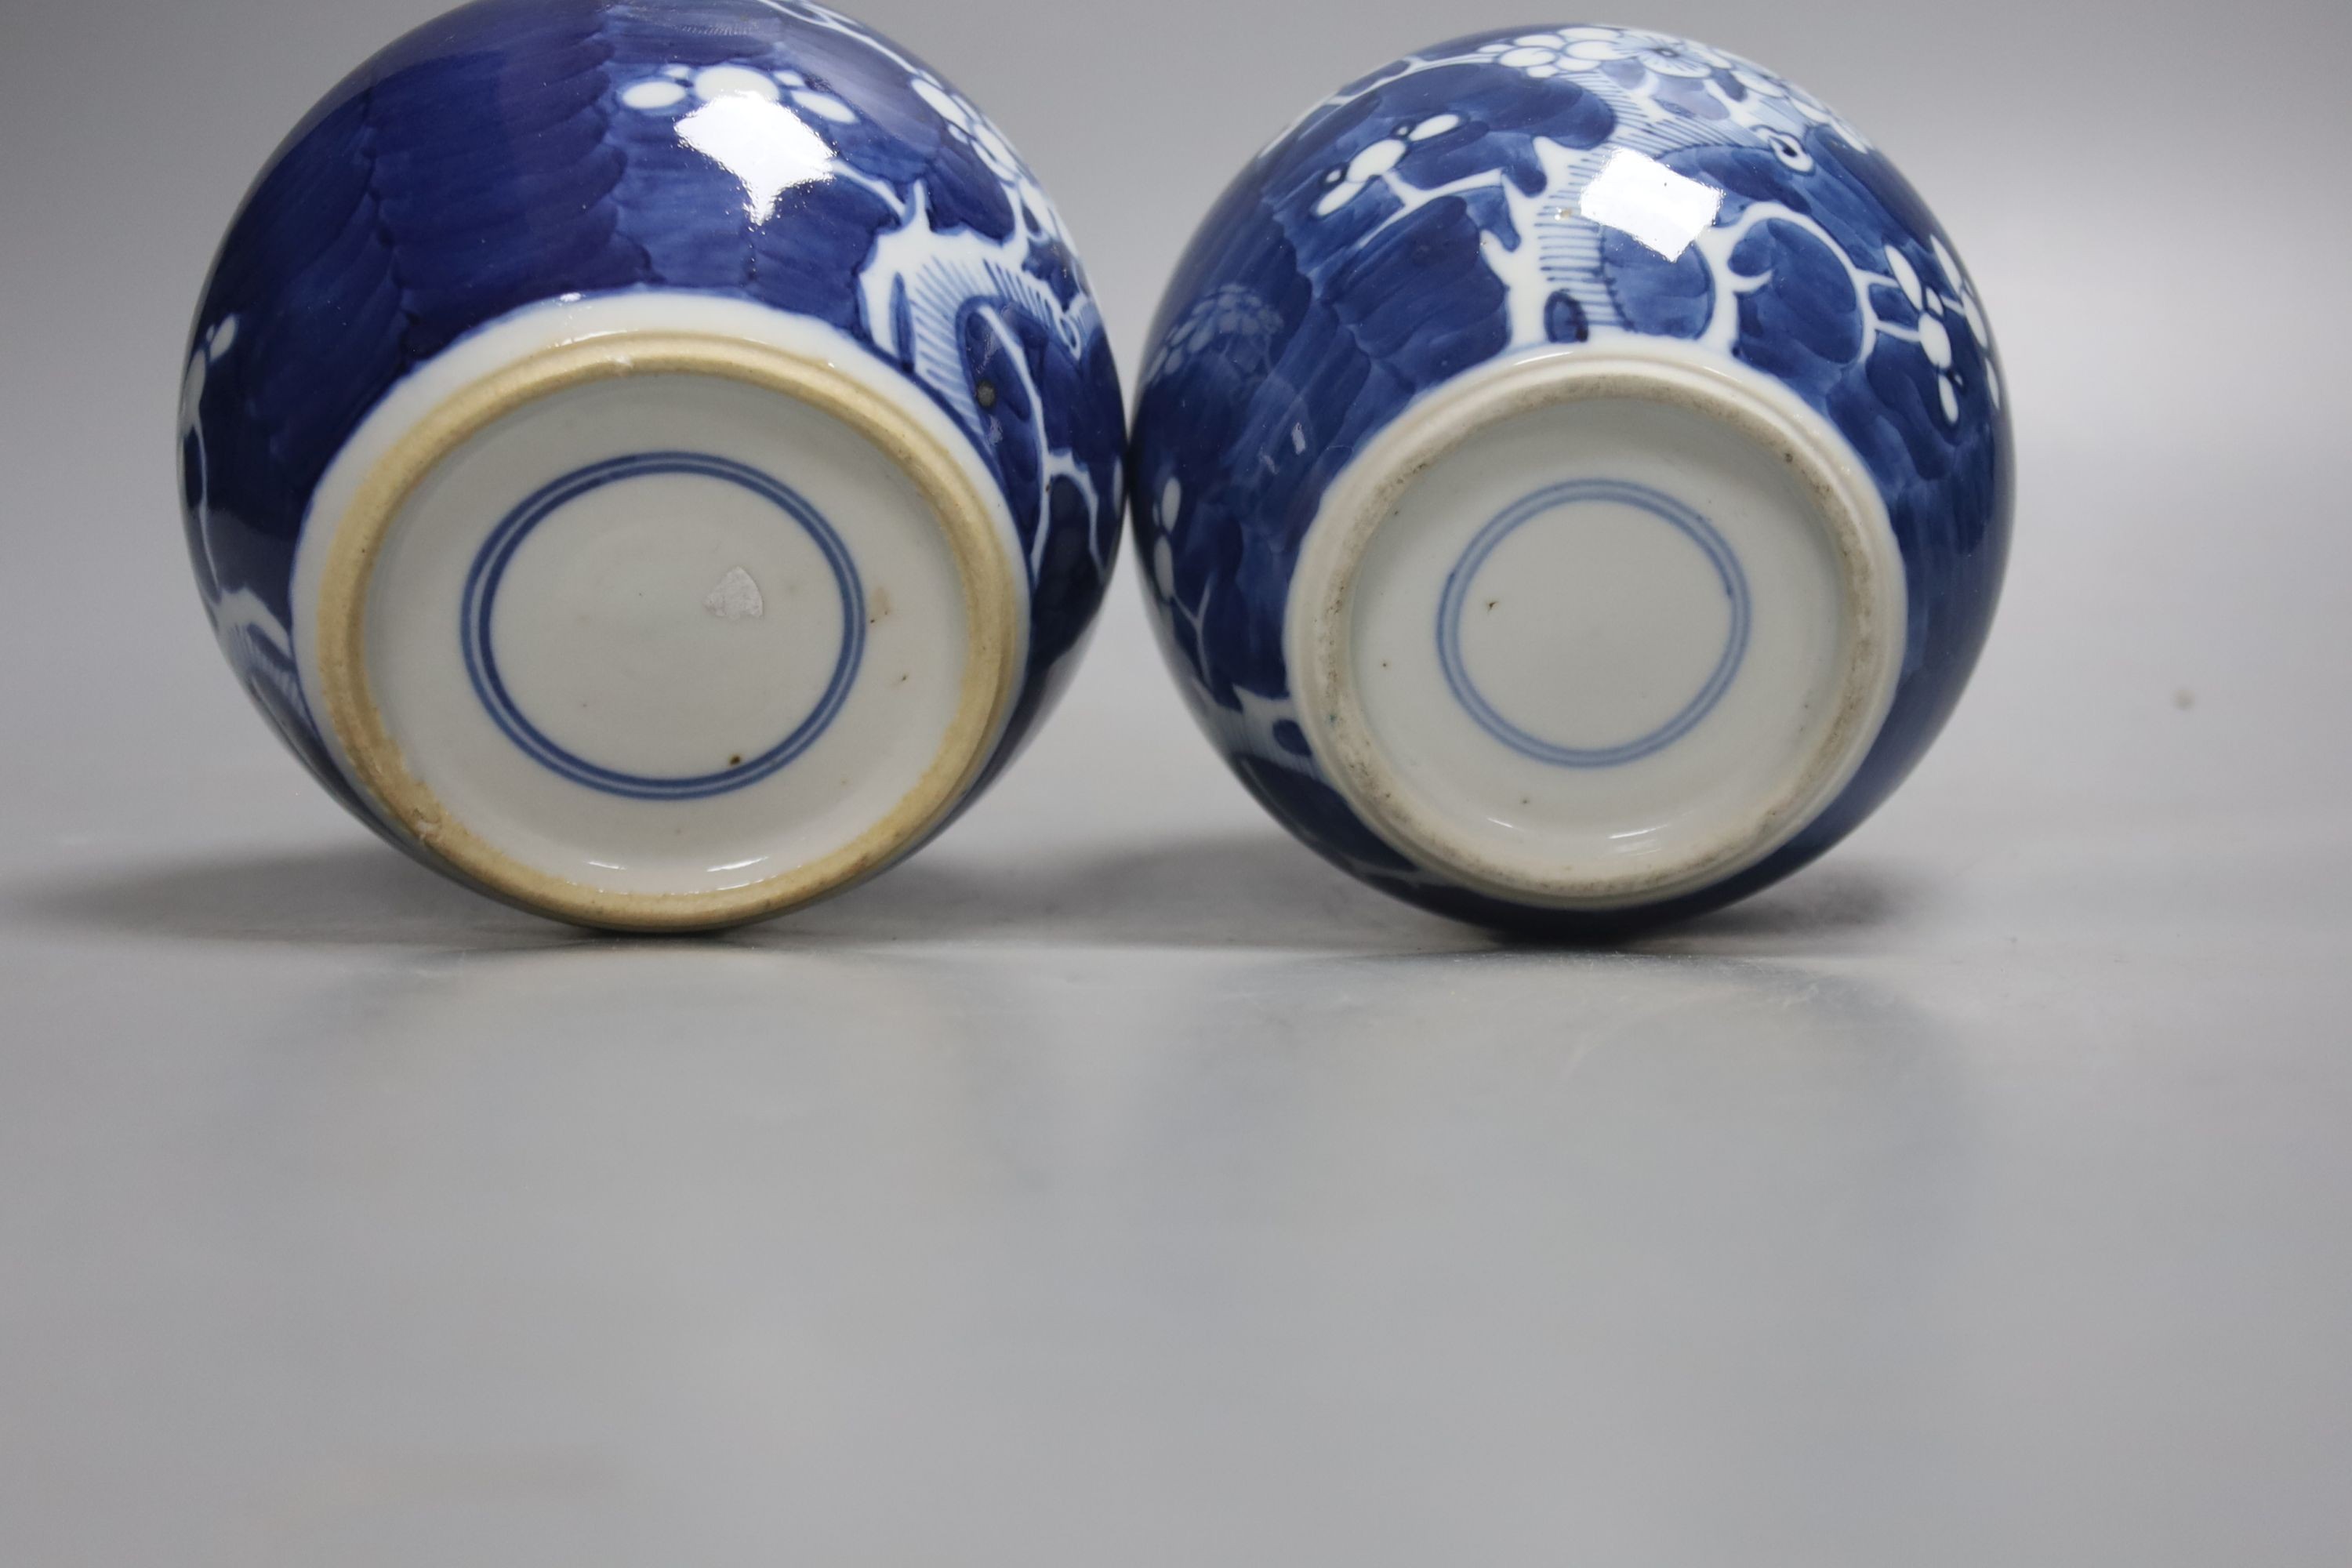 A pair of early 20th century blue and white prunus jars and covers